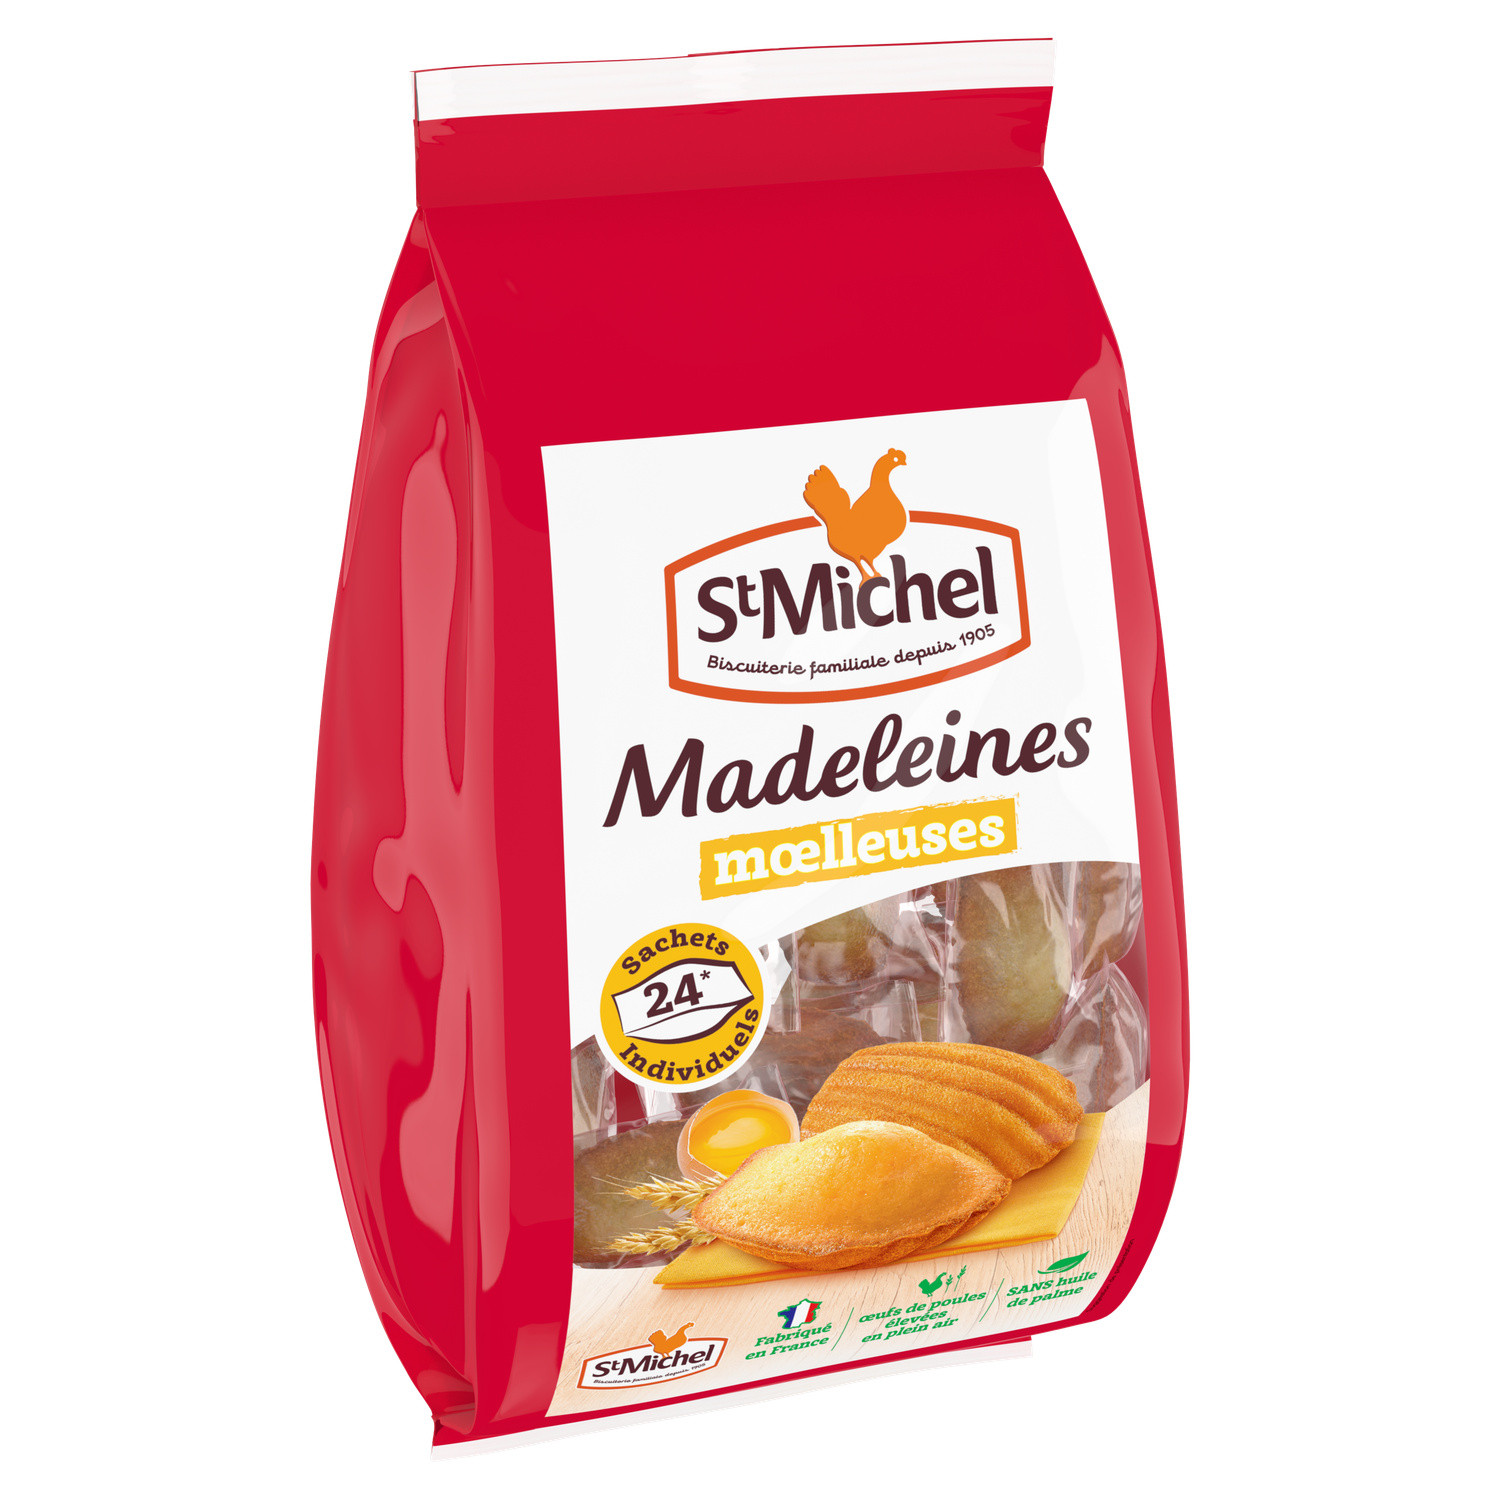 https://my-french-grocery.com/wp-content/uploads/2021/07/MADELEINES-ST-MICHEL.jpg